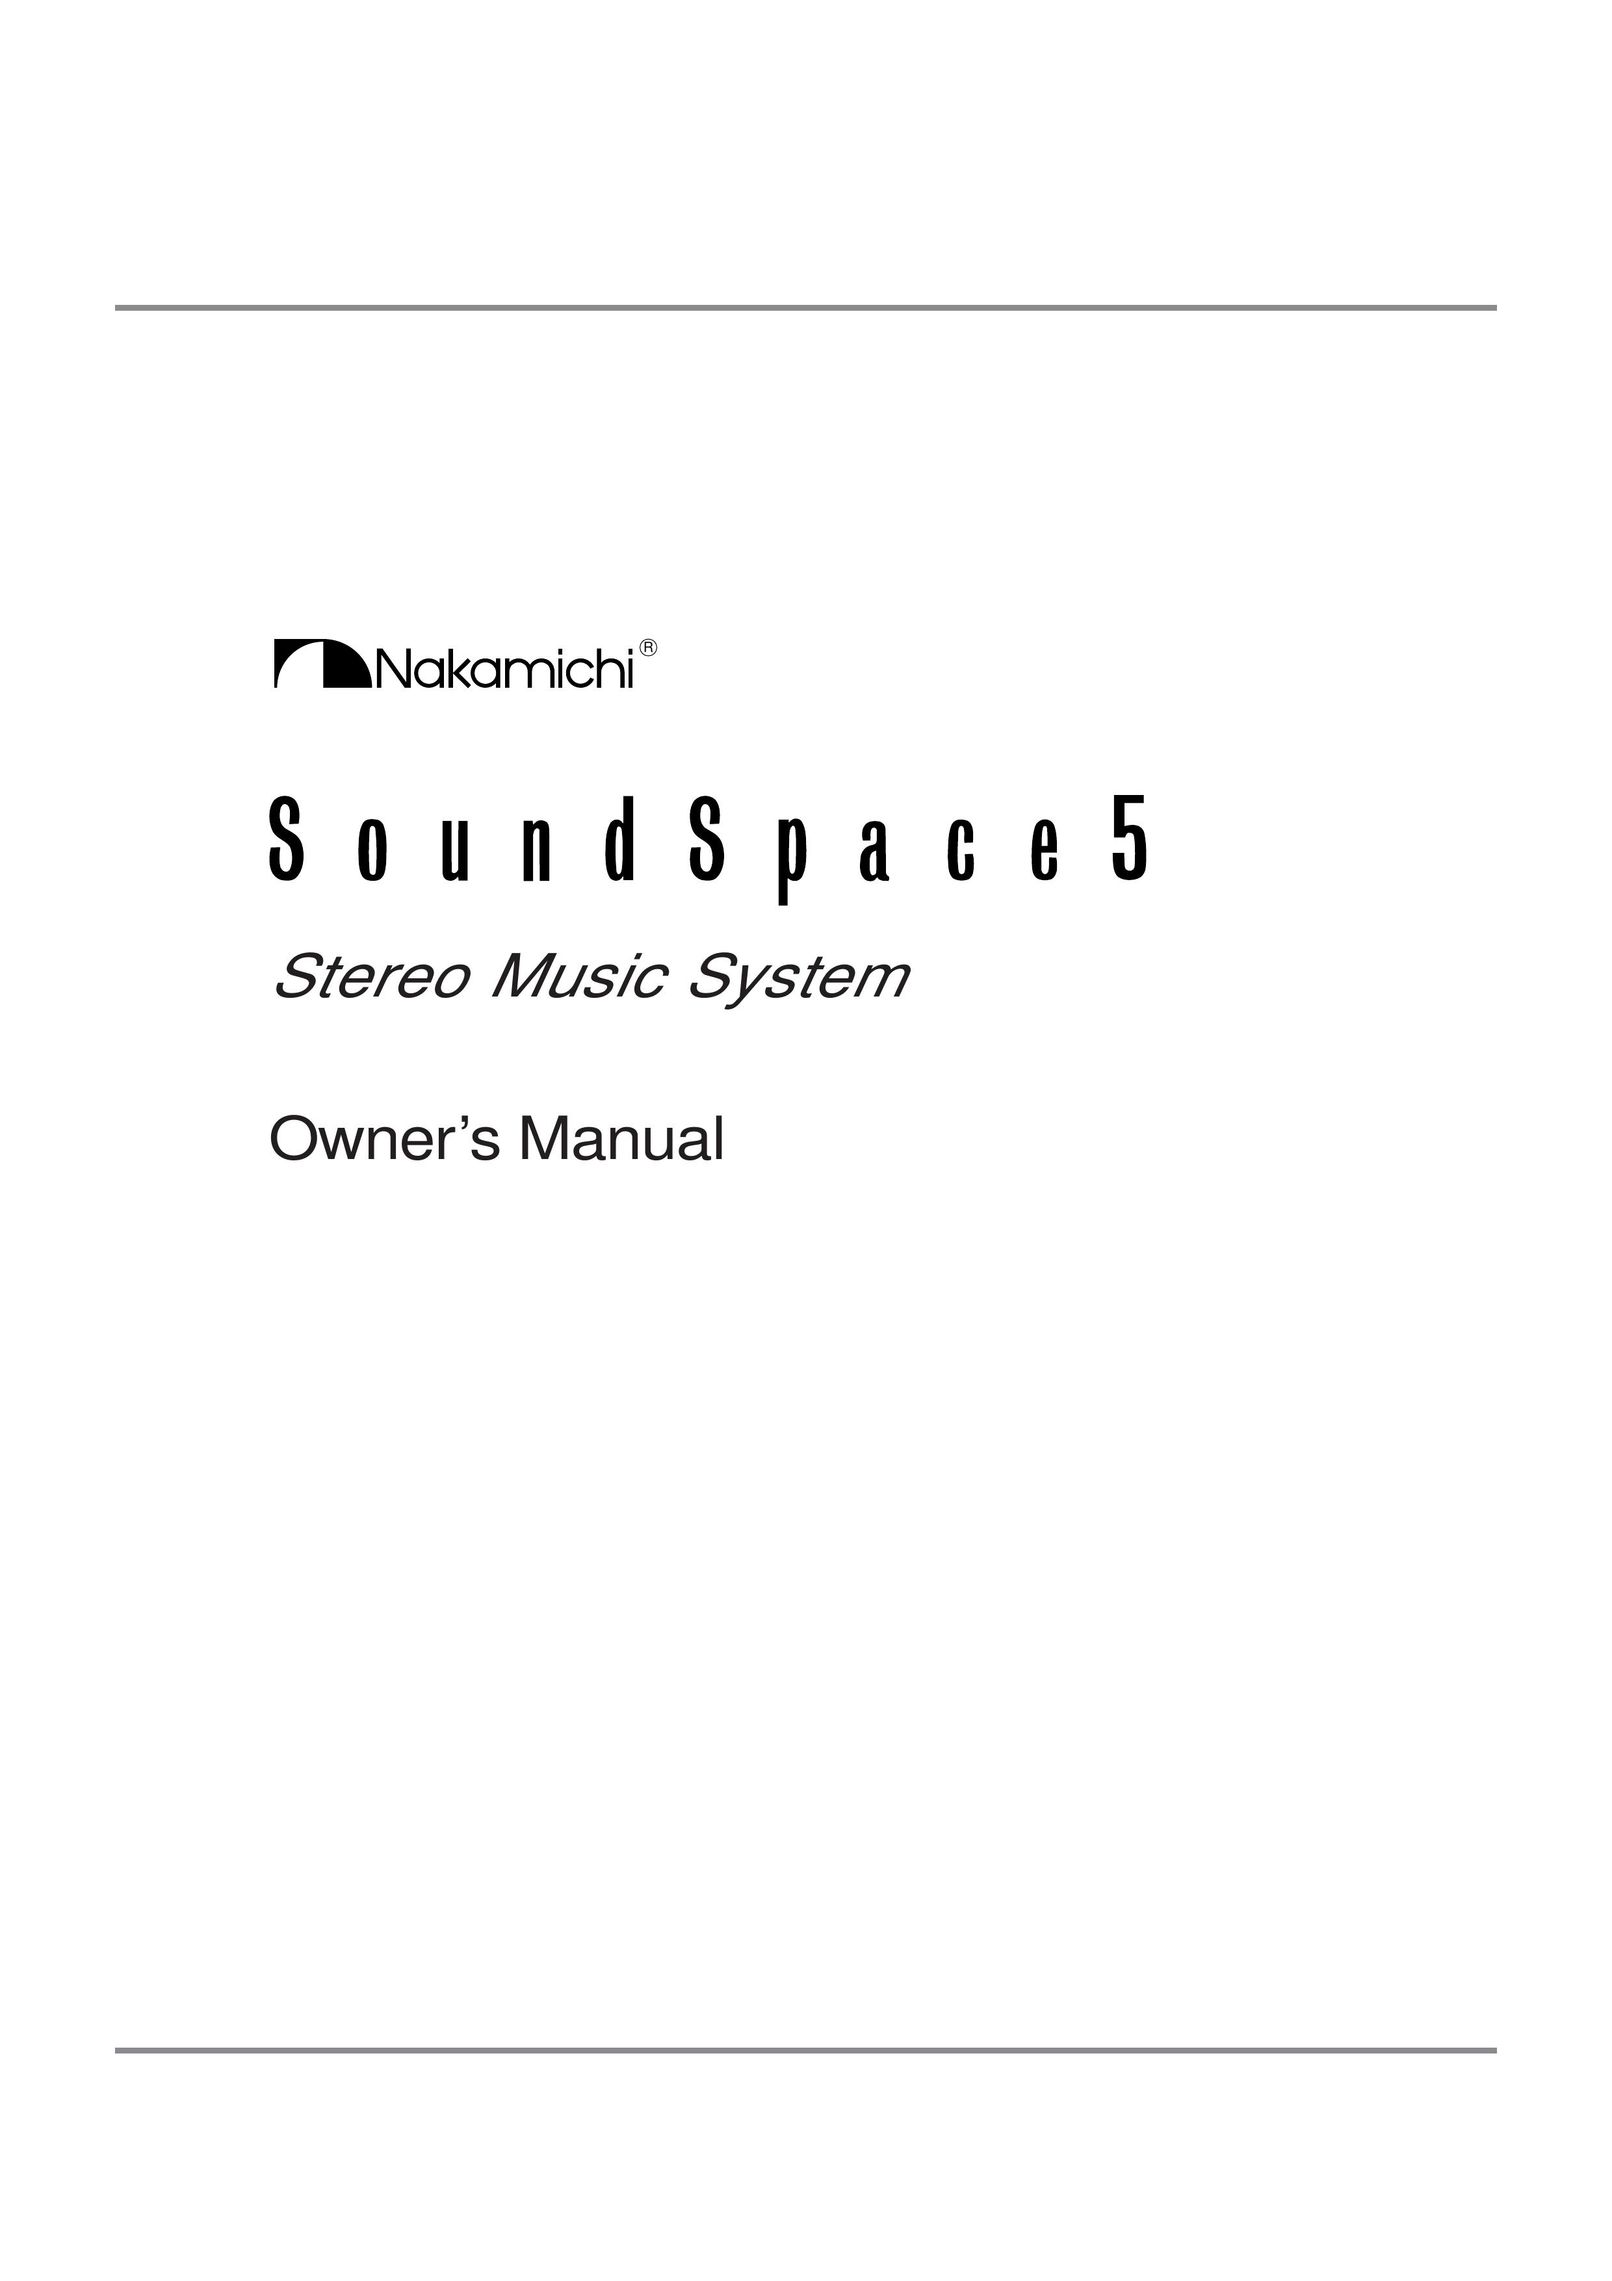 Nakamichi SoundSpace 5 Stereo System User Manual